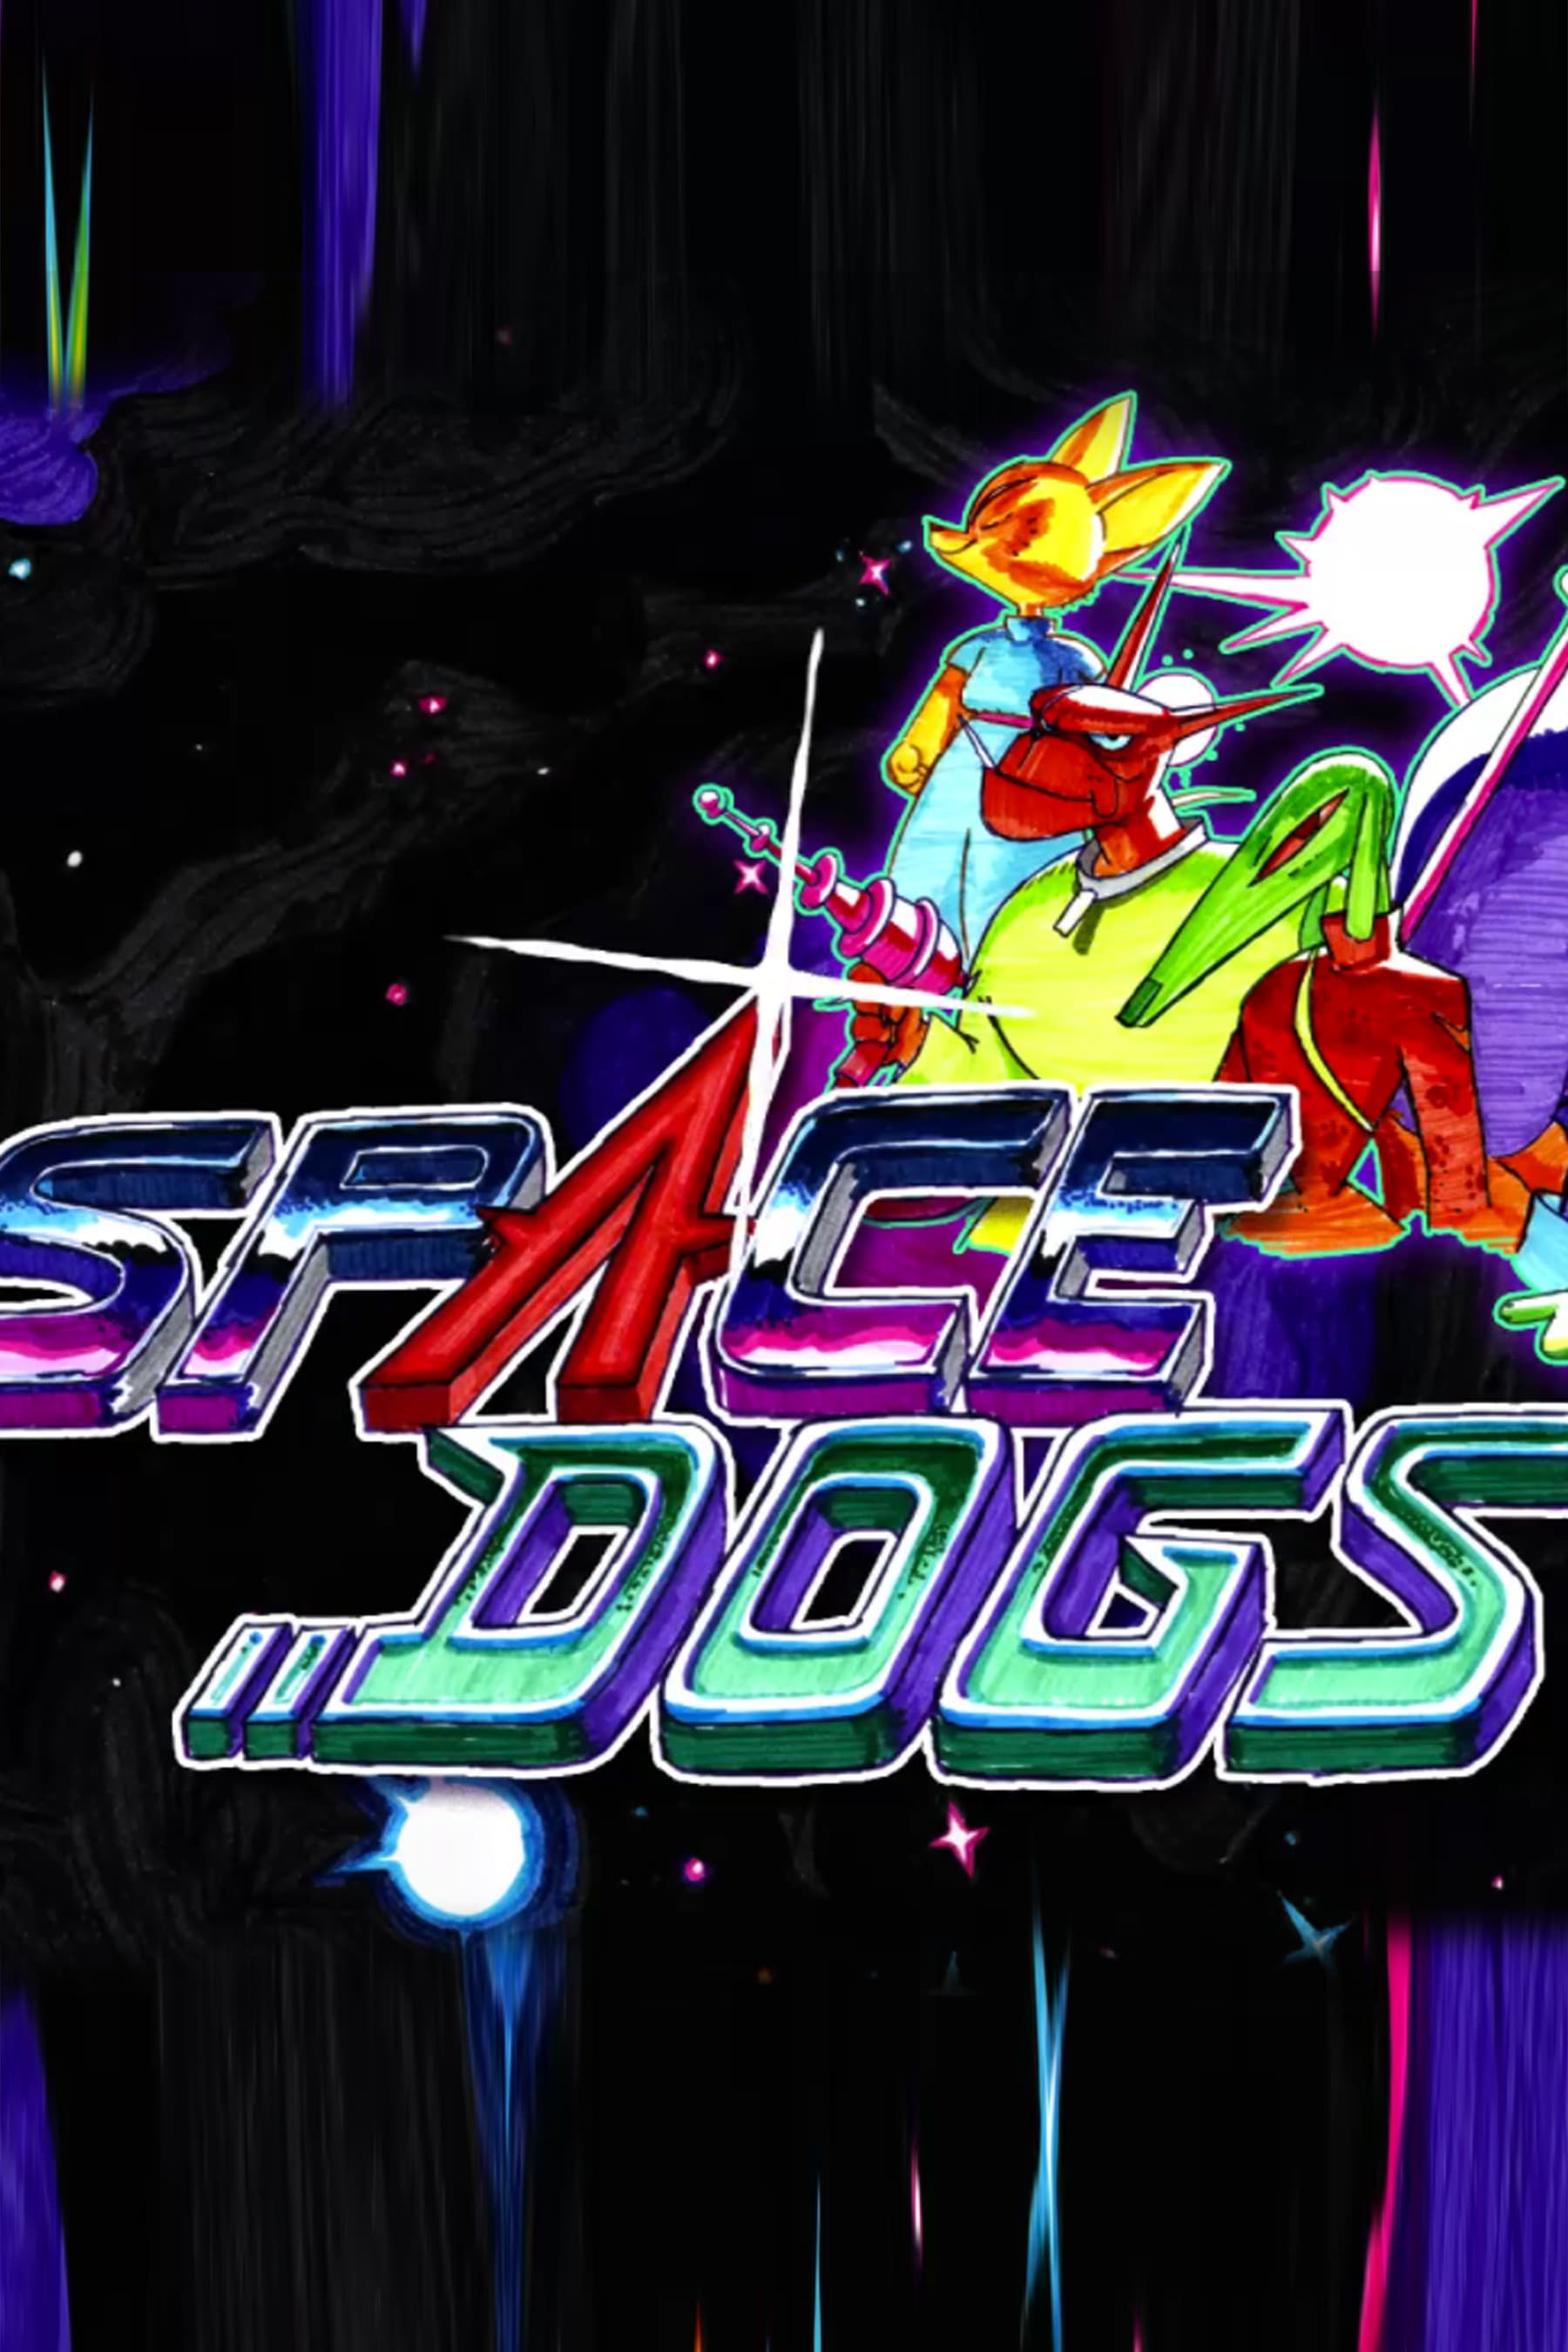 Spacedogs